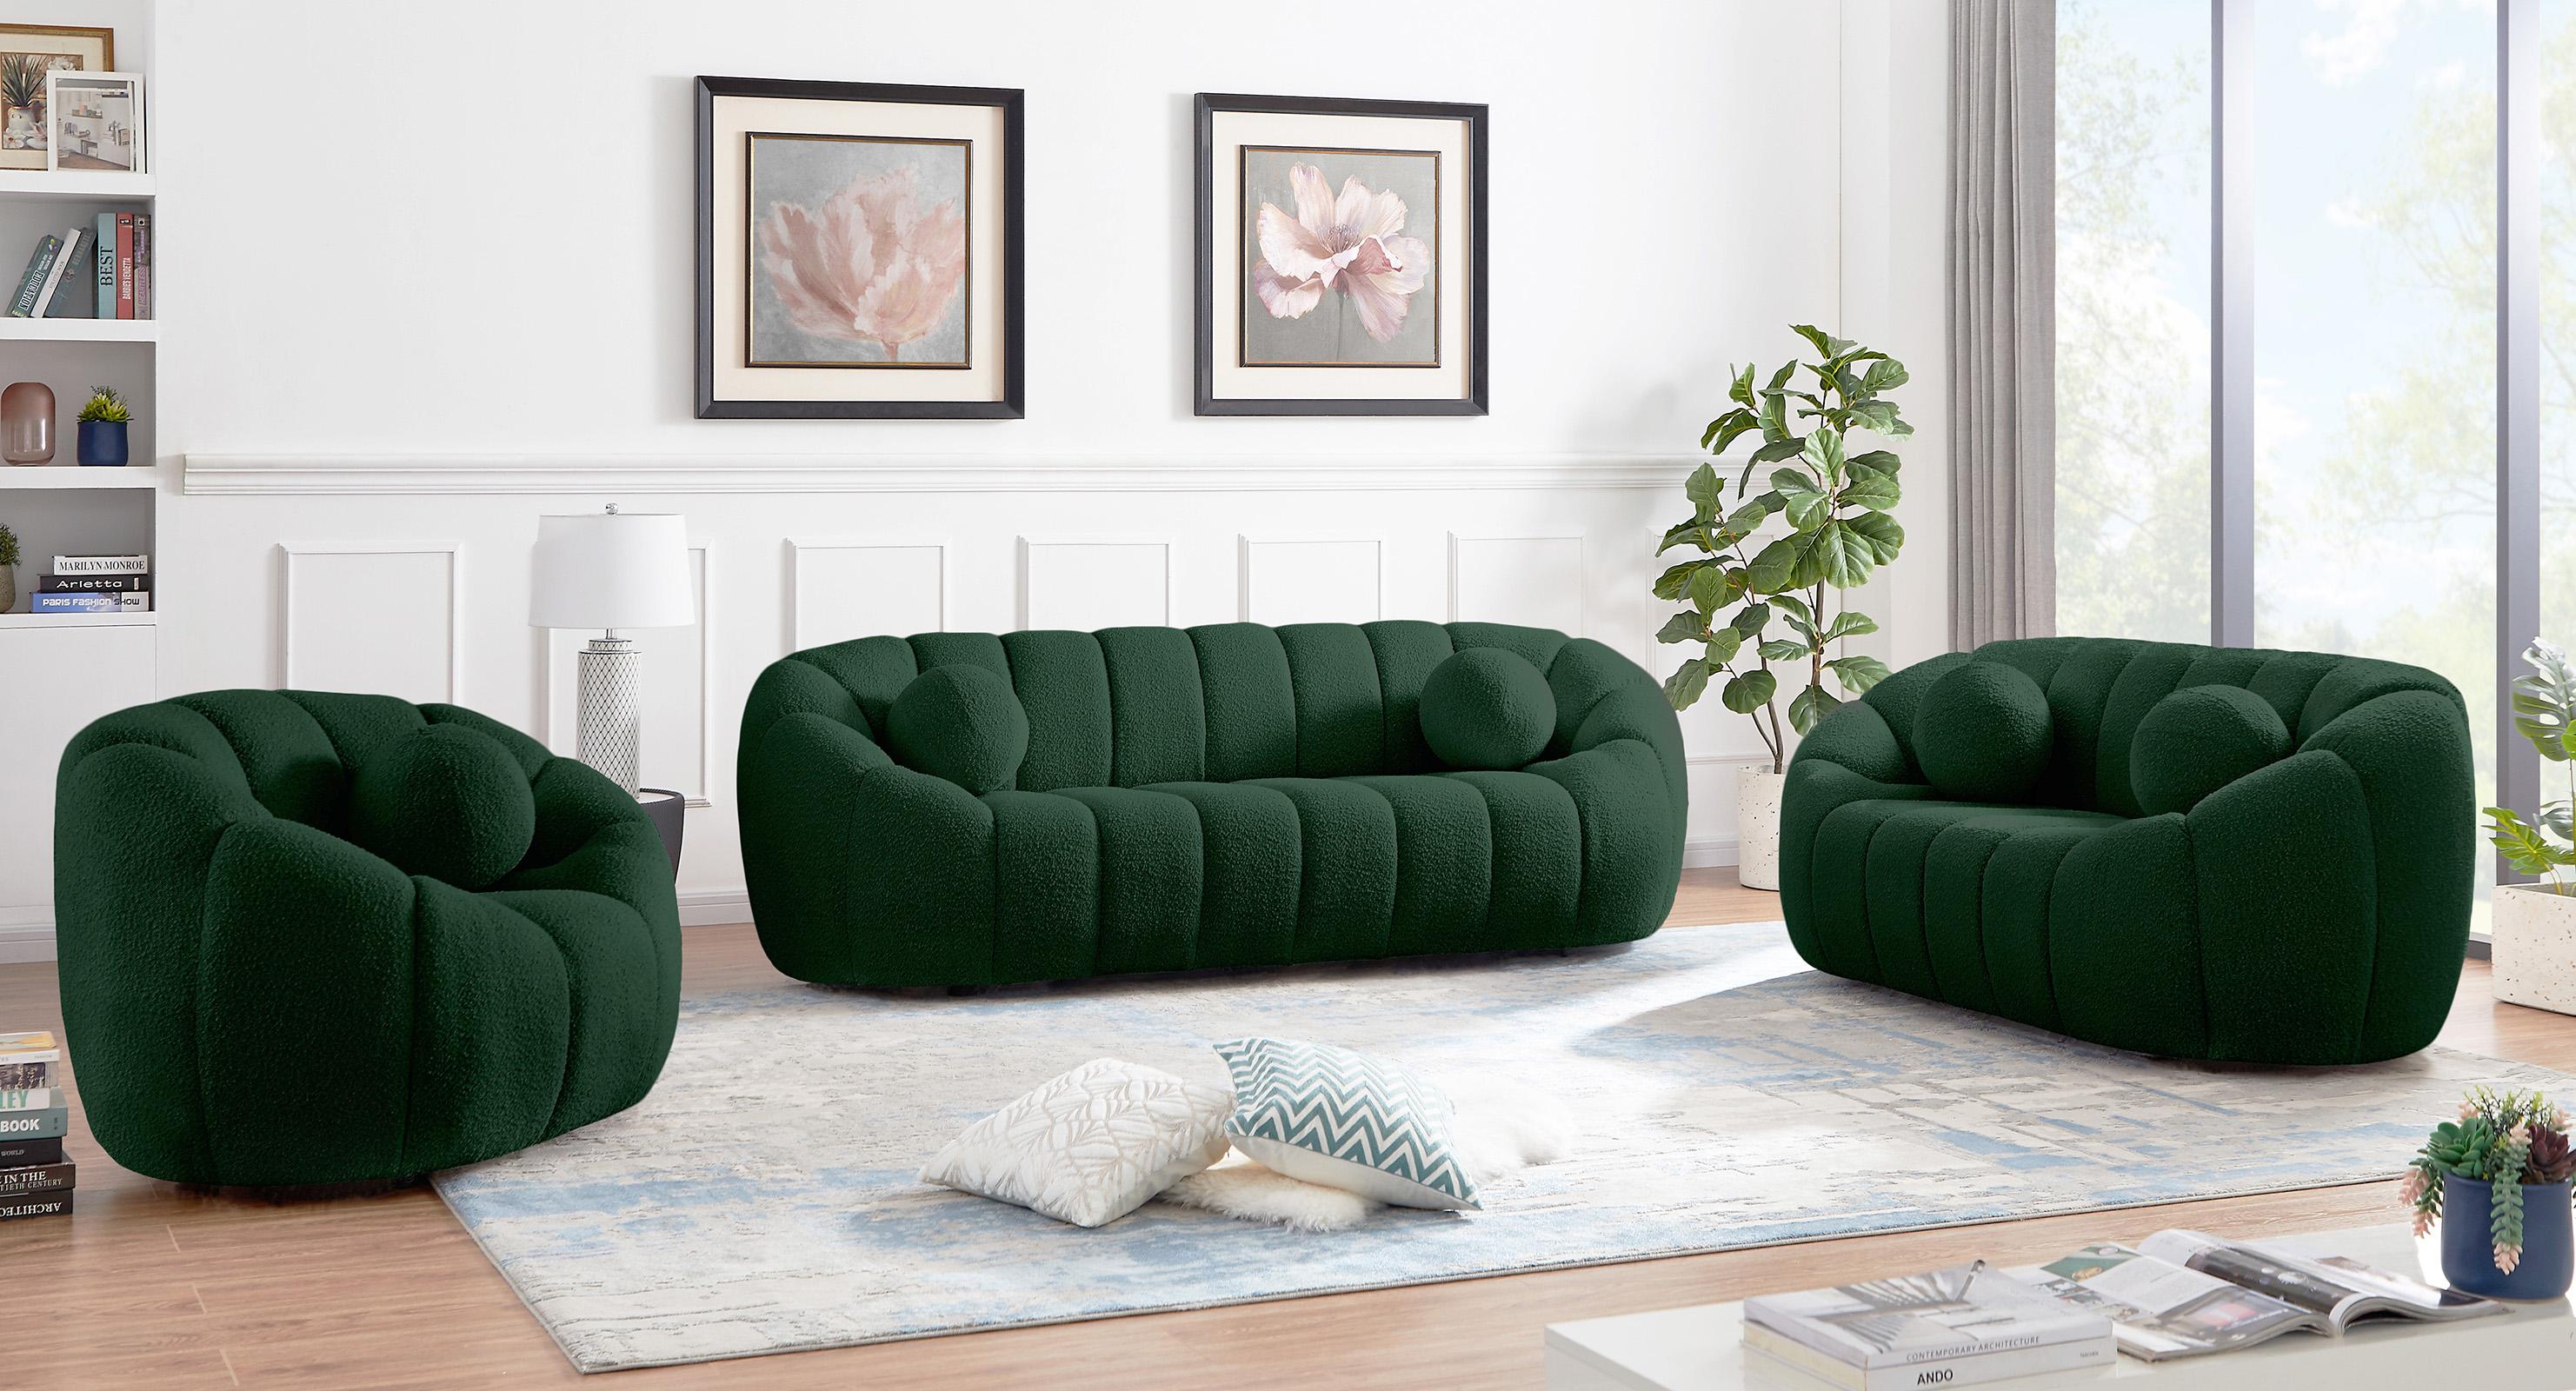 

    
644Green-S Glam Green Boucle Channel Tufted Sofa ELIJAH 644Green-S Meridian Modern
